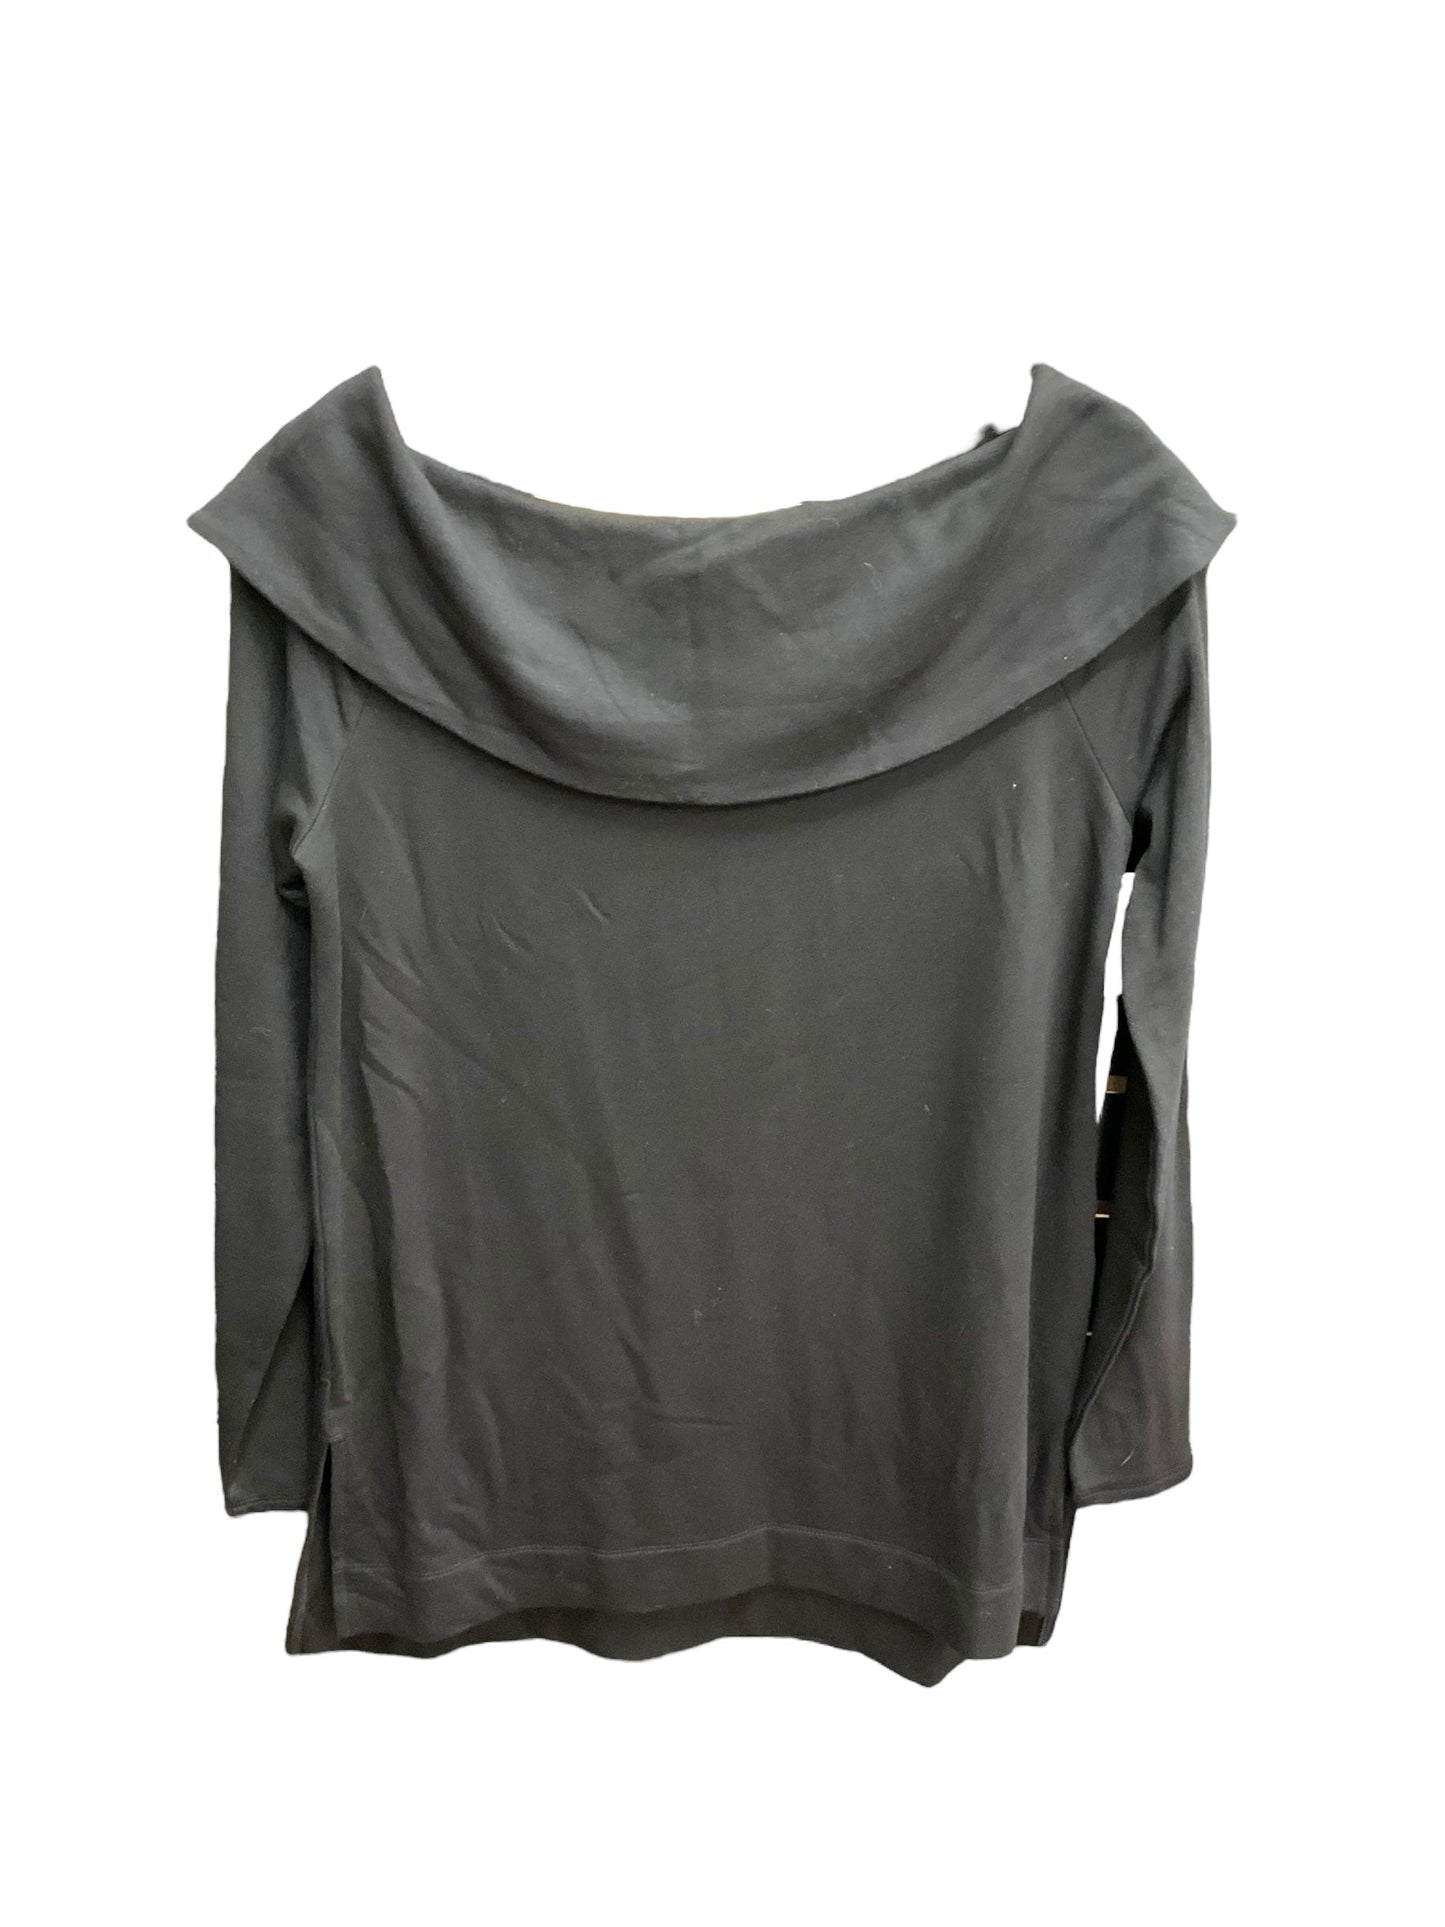 Black Top Long Sleeve Chicos, Size Xs